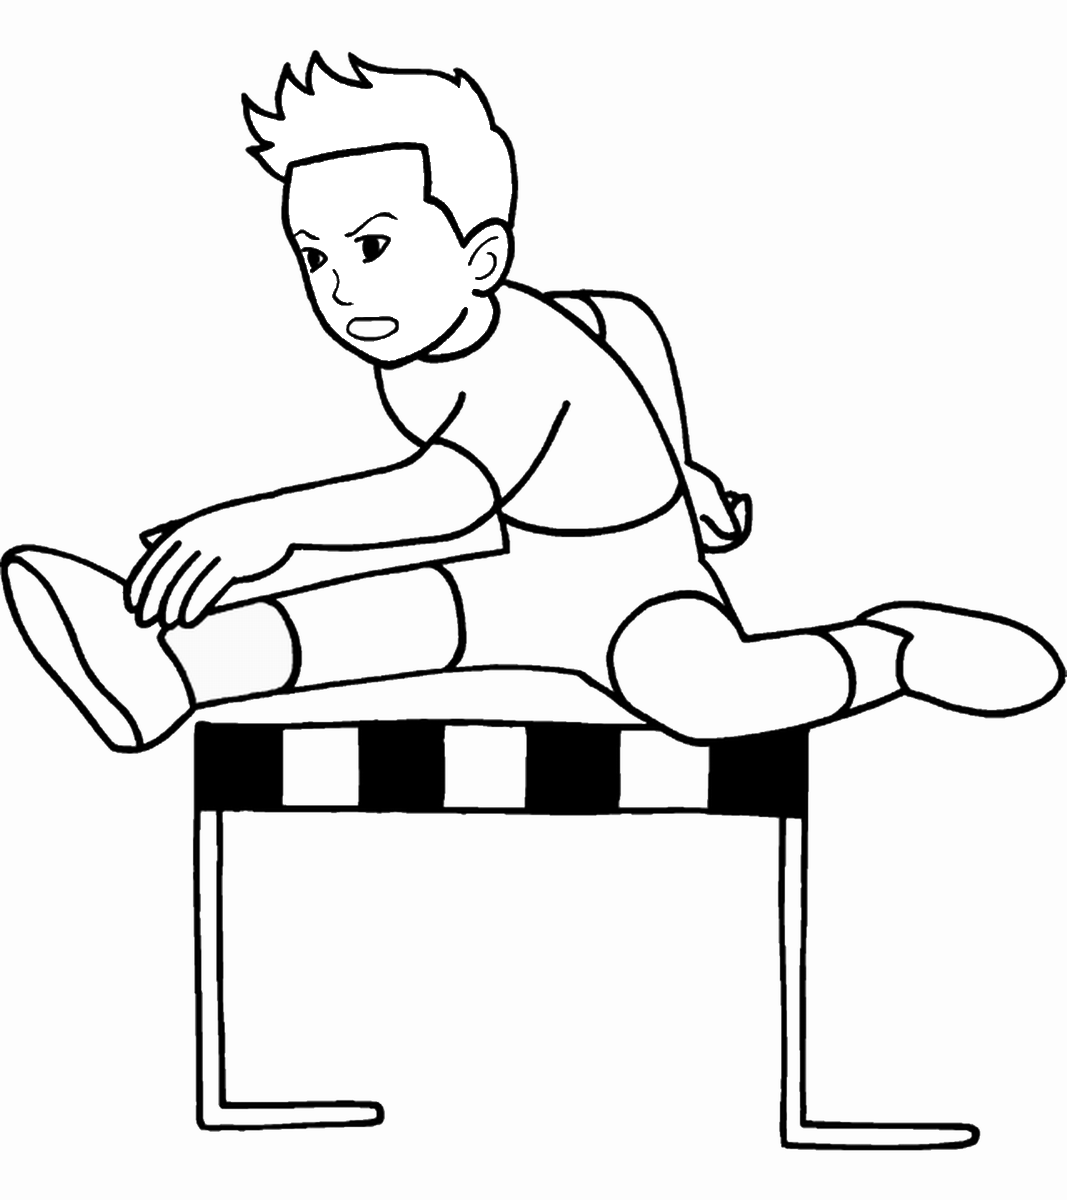 Sports Coloring Pages sports_cl_062 Printable 2021 5796 Coloring4free